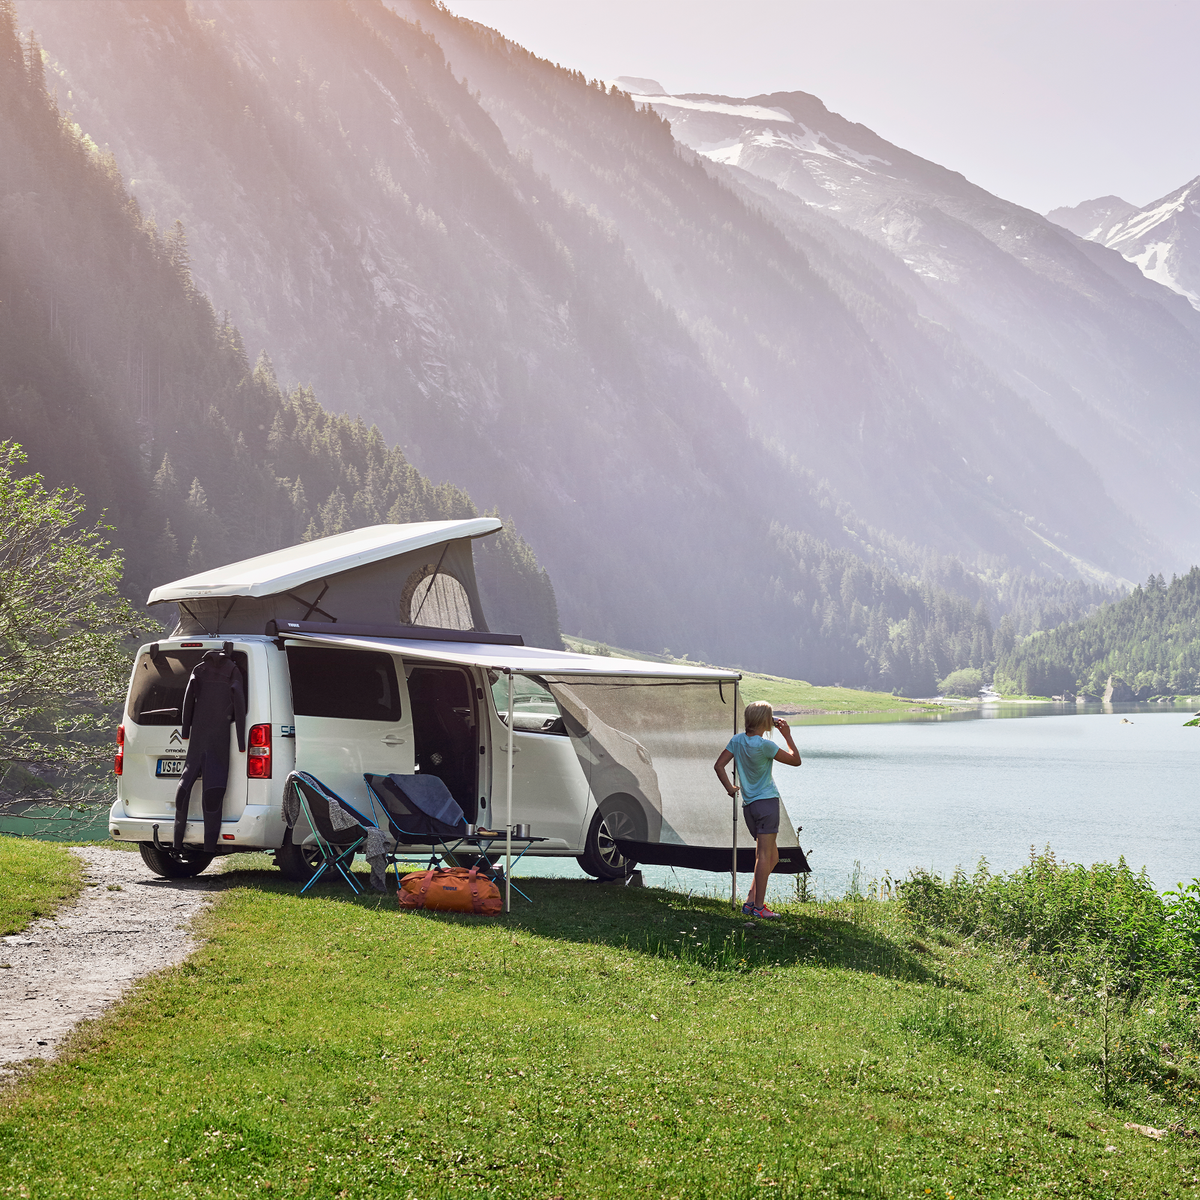 A van with a pop-up roof is parked by the lake with a Thule Sun Blocker Side awning side wall.